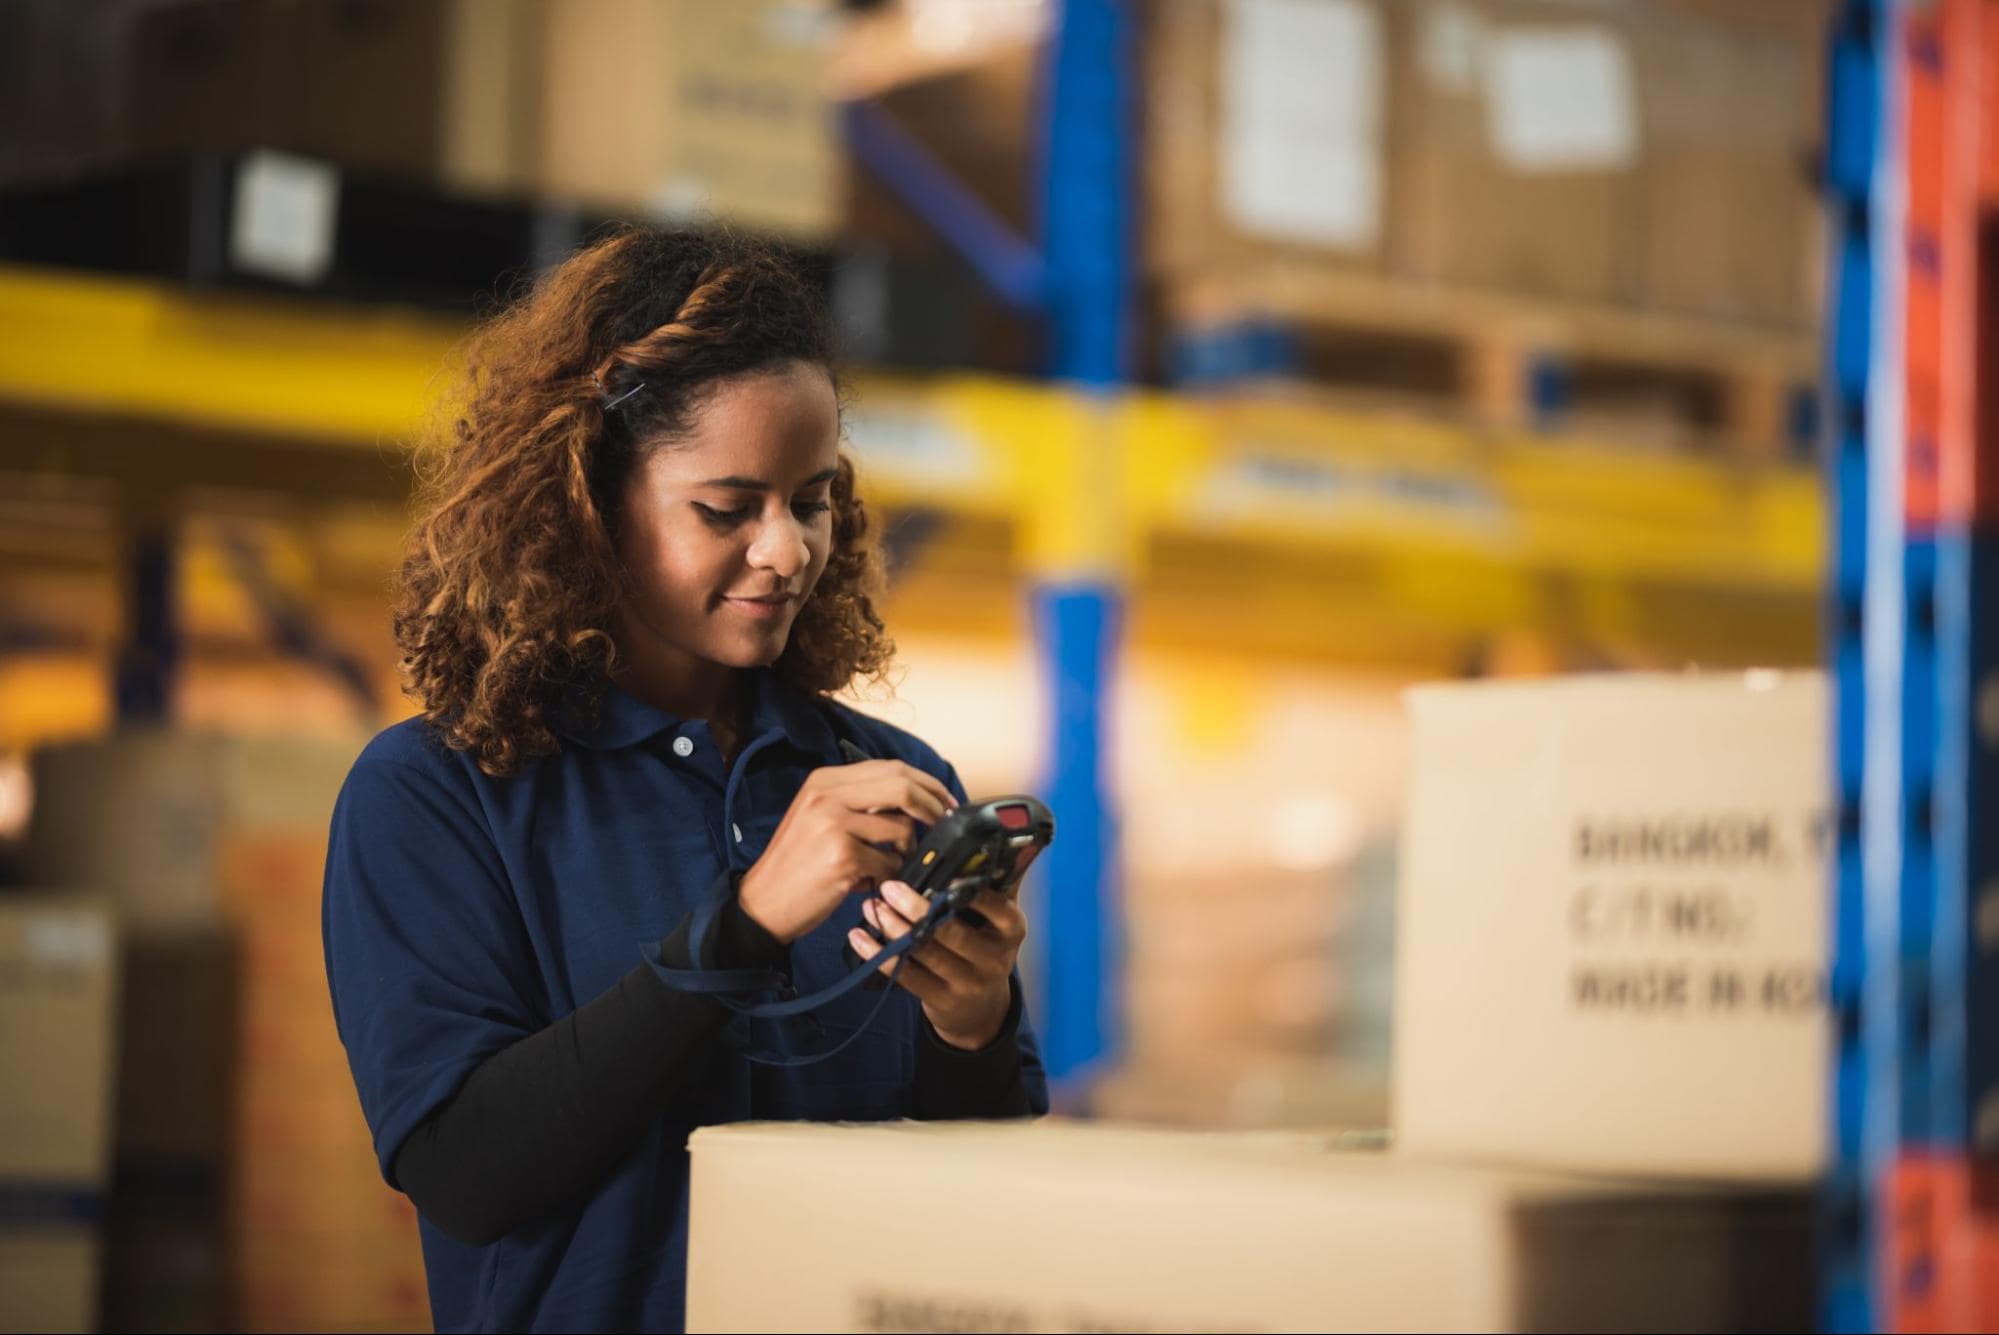 A female warehouse worker operating a handheld picking device standing next to cardboard boxes.